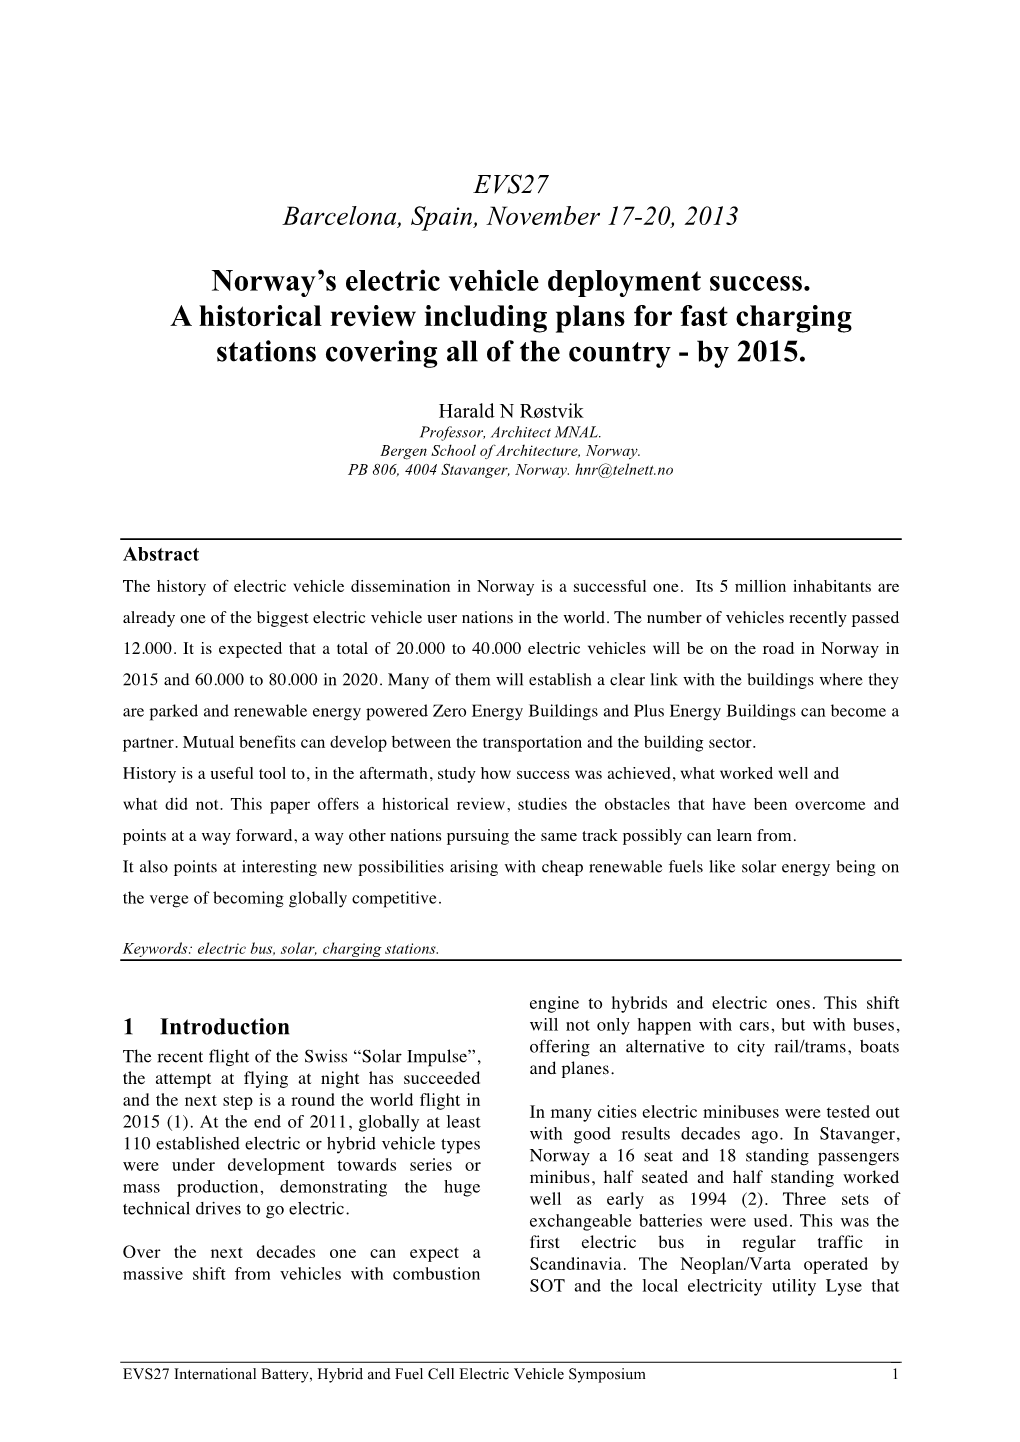 Norway's Electric Vehicle Deployment Success. a Historical Review